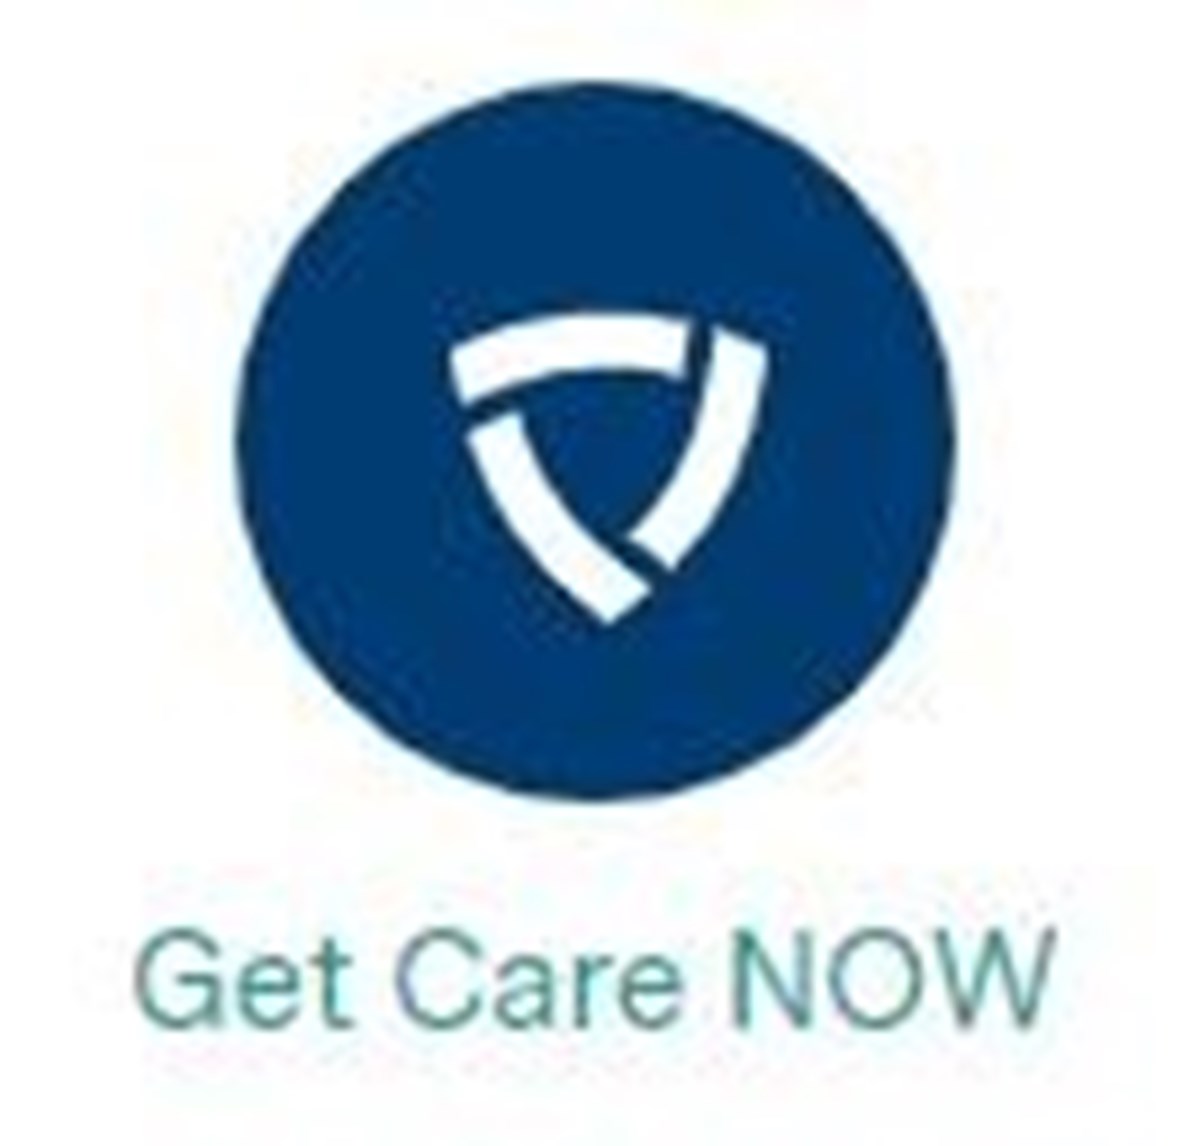 'Get Care NOW' launches to ease patient wait times for care